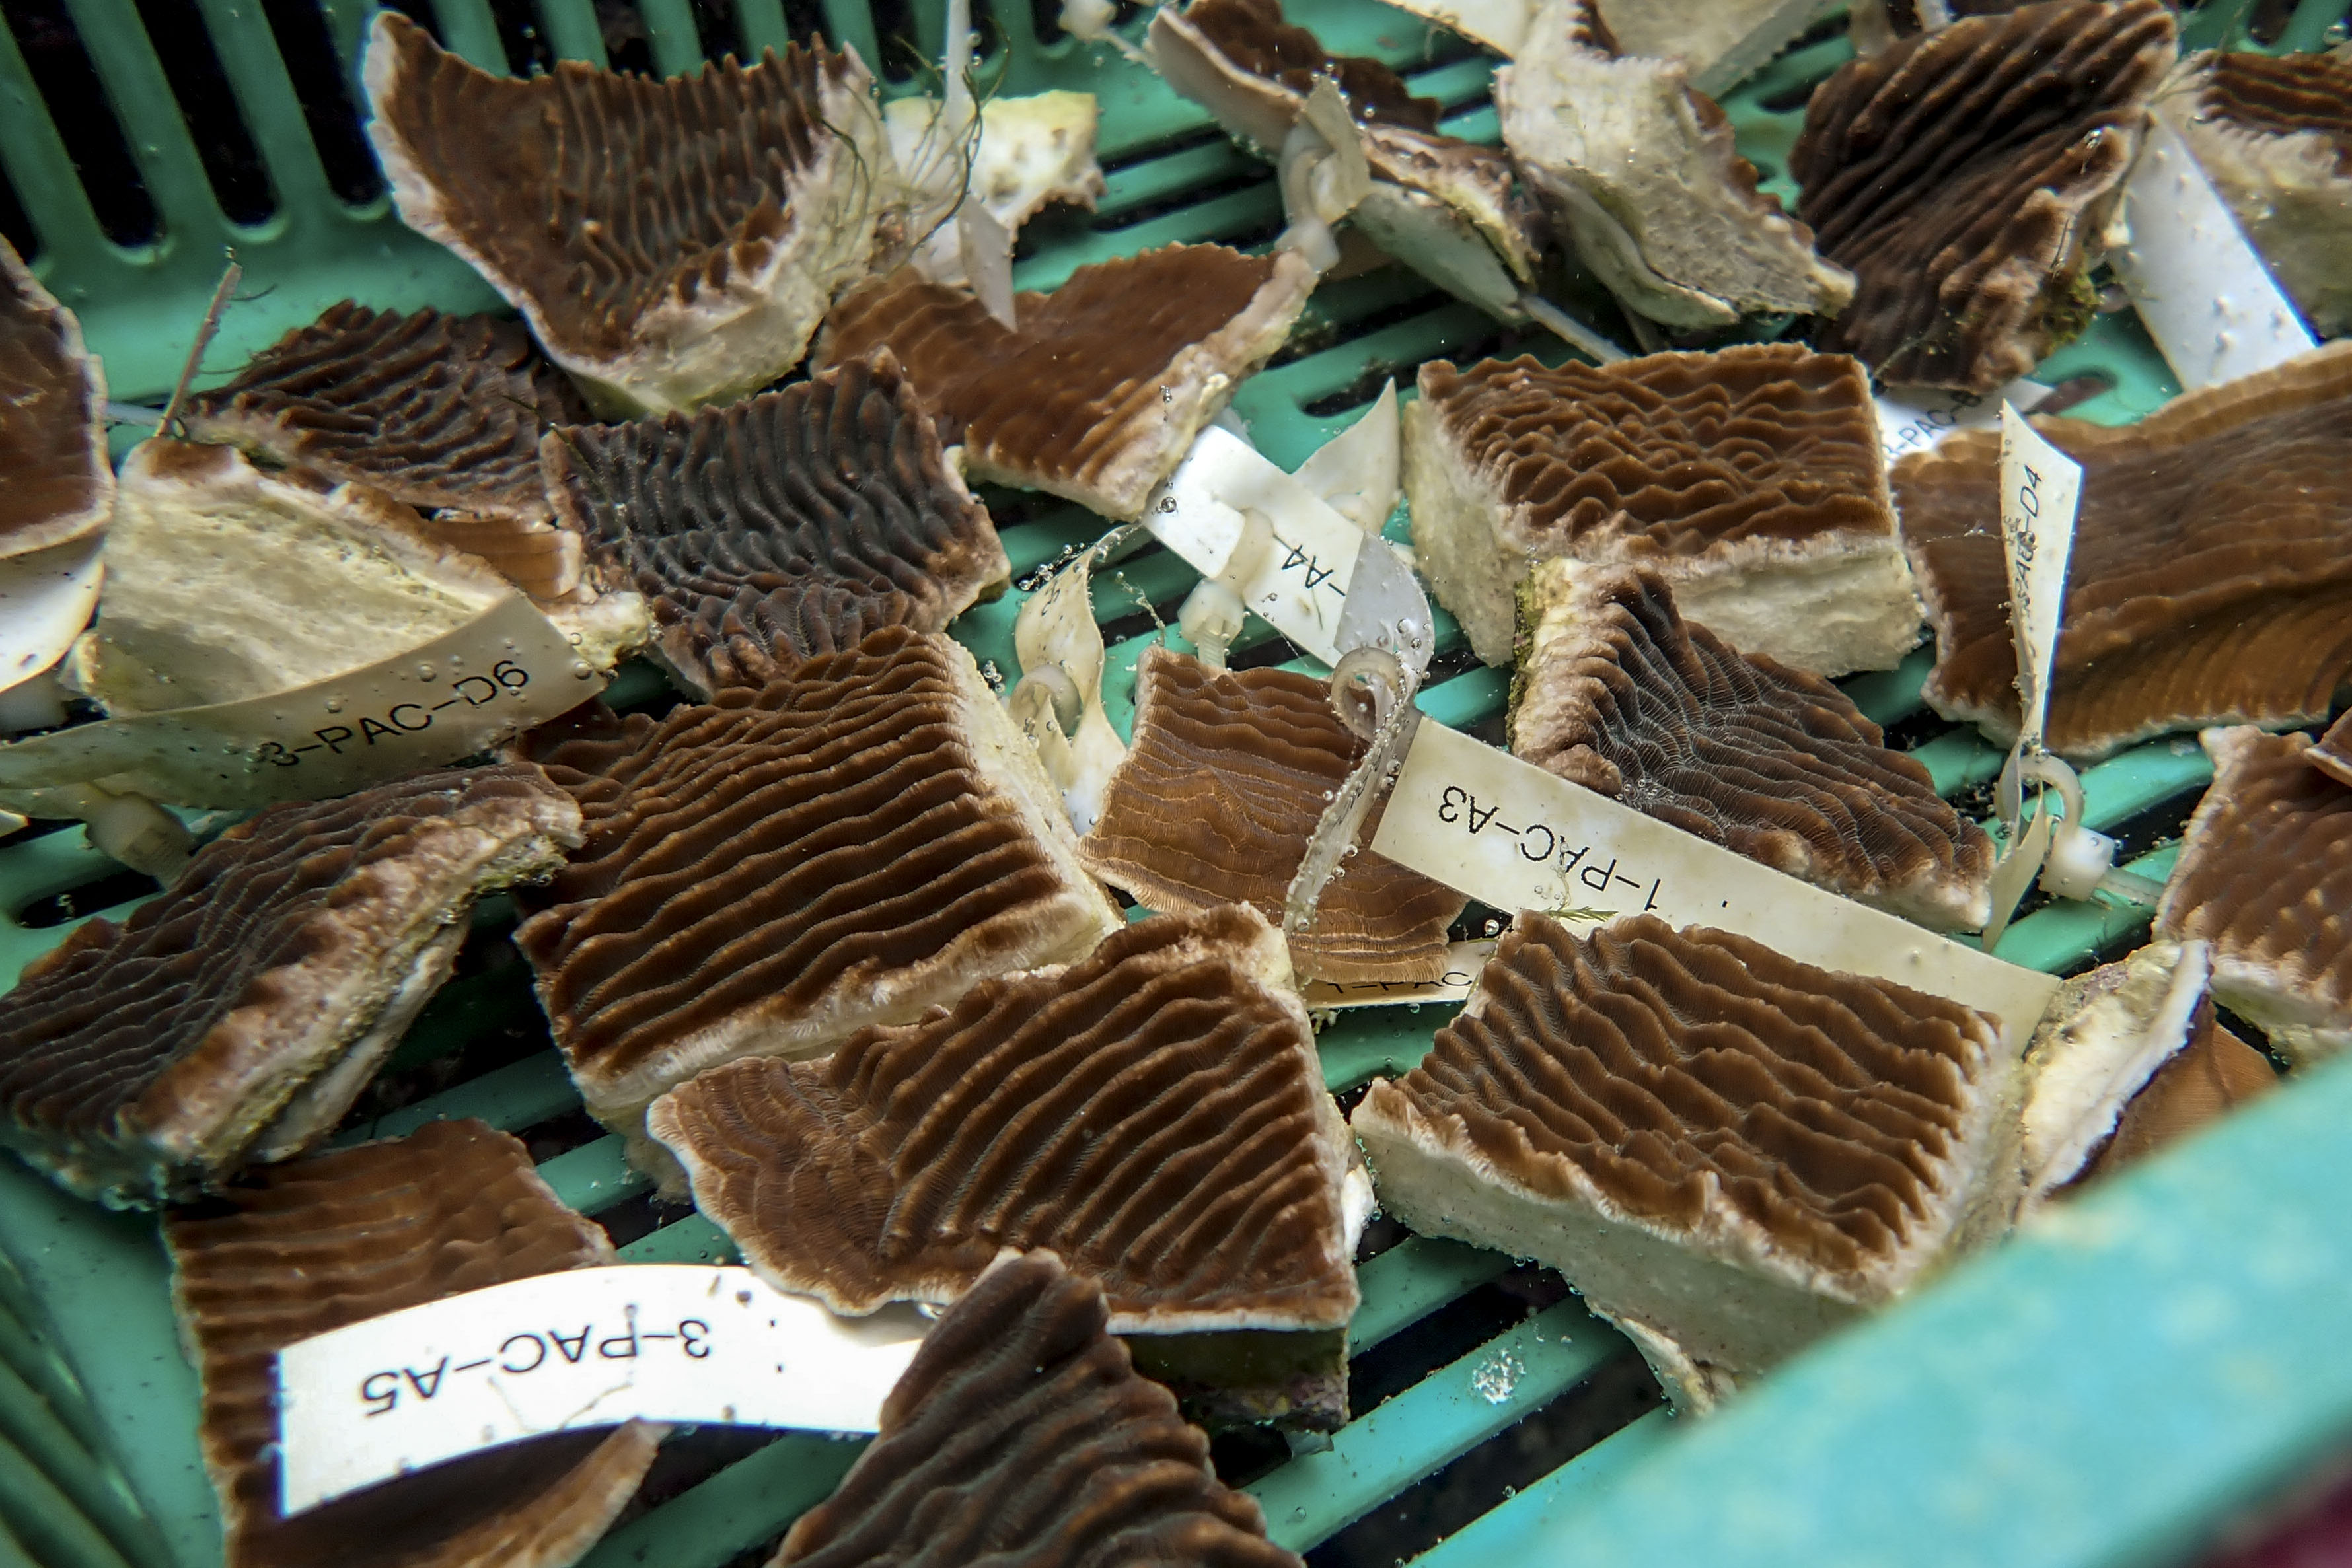 More coral fragments being prepared for a culture experiment. PHOTO: WALLACE WOON